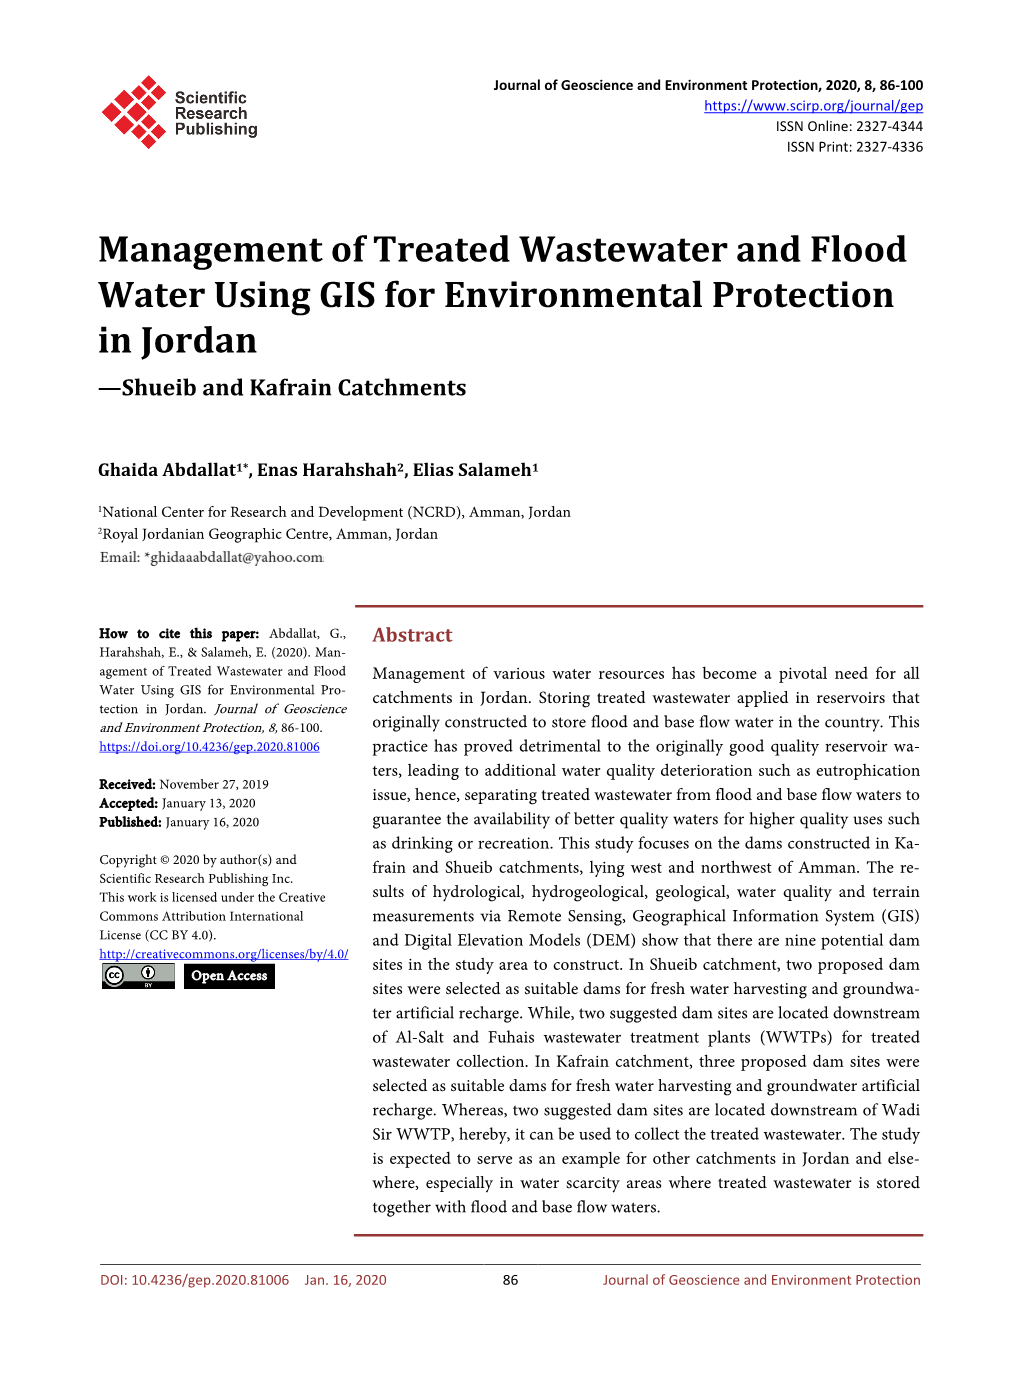 Management of Treated Wastewater and Flood Water Using GIS for Environmental Protection in Jordan —Shueib and Kafrain Catchments